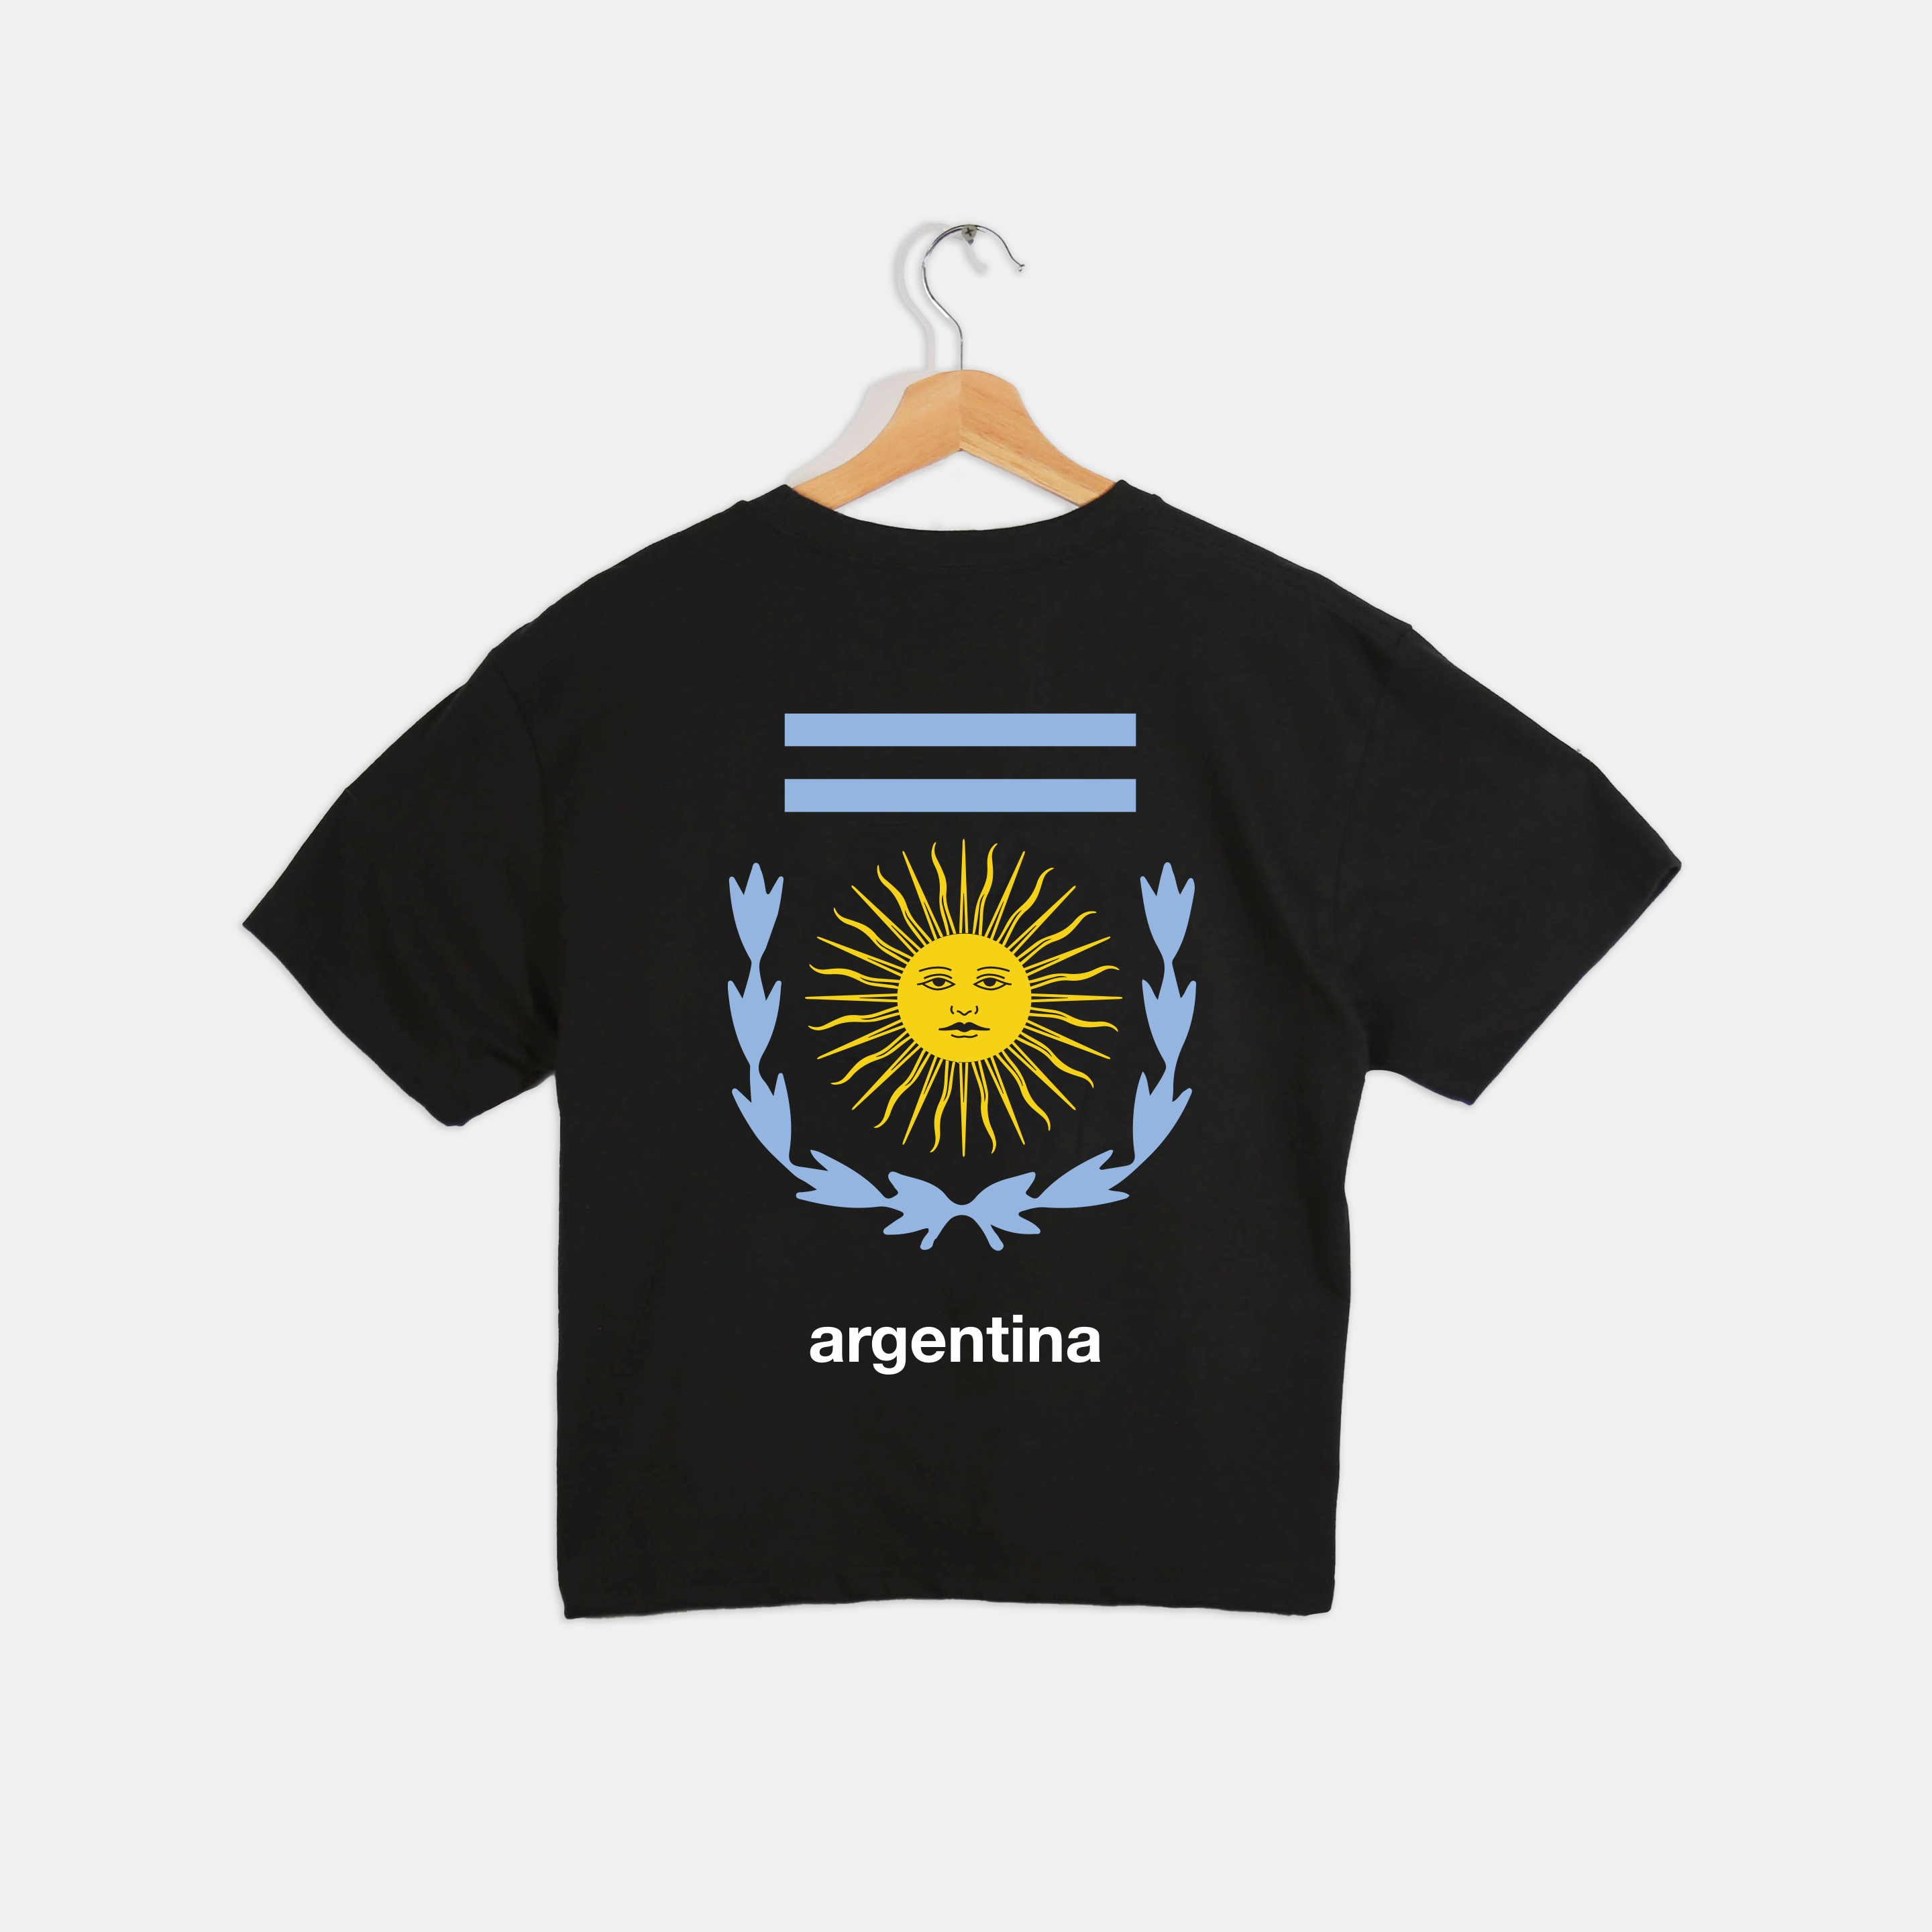 "Unofficial" Argentina Cropped Tee